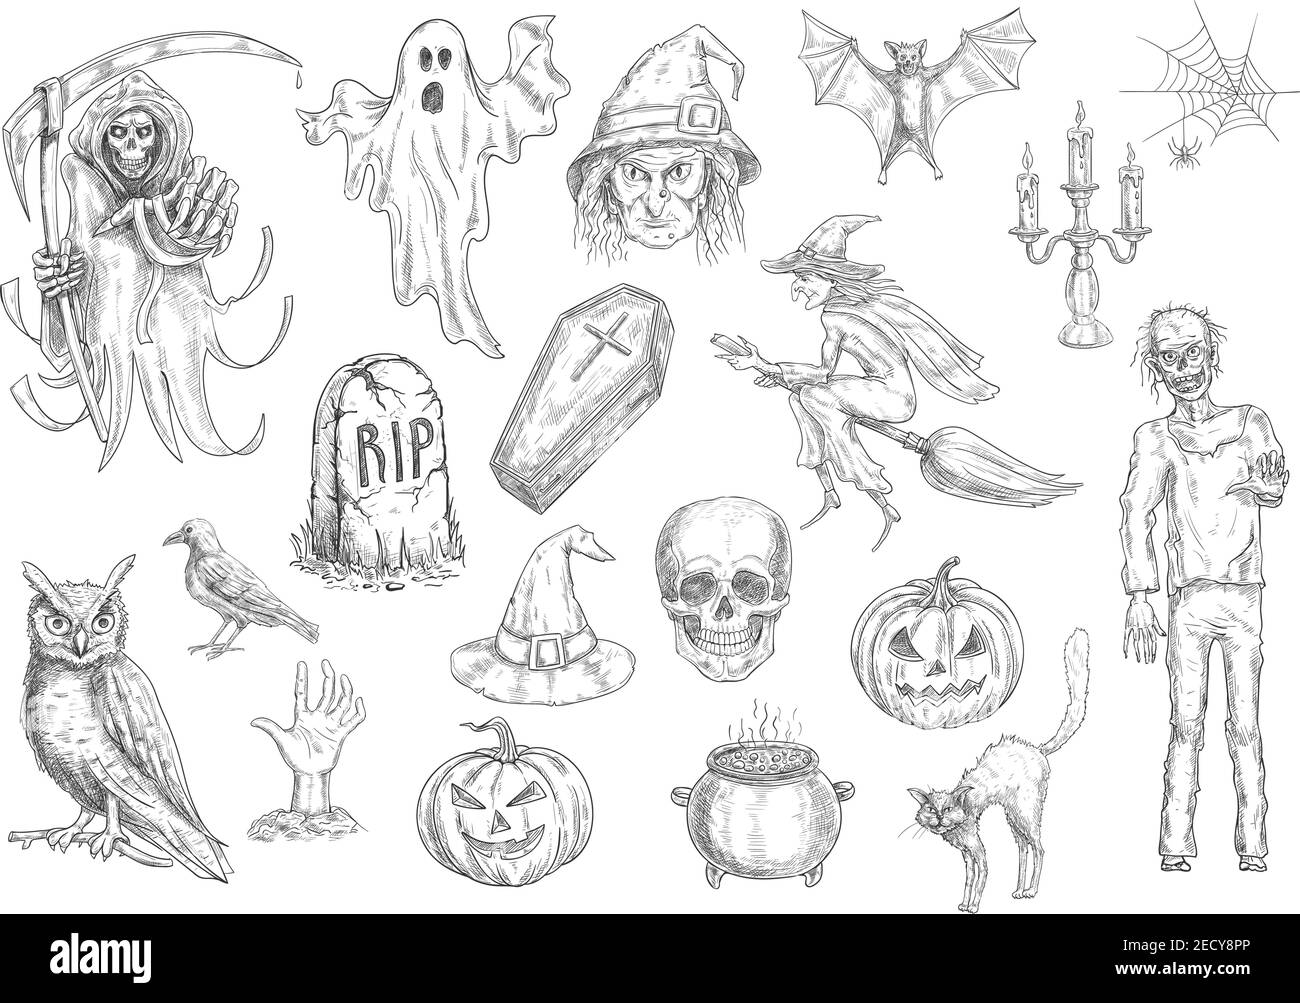 halloween sketches - Google Search